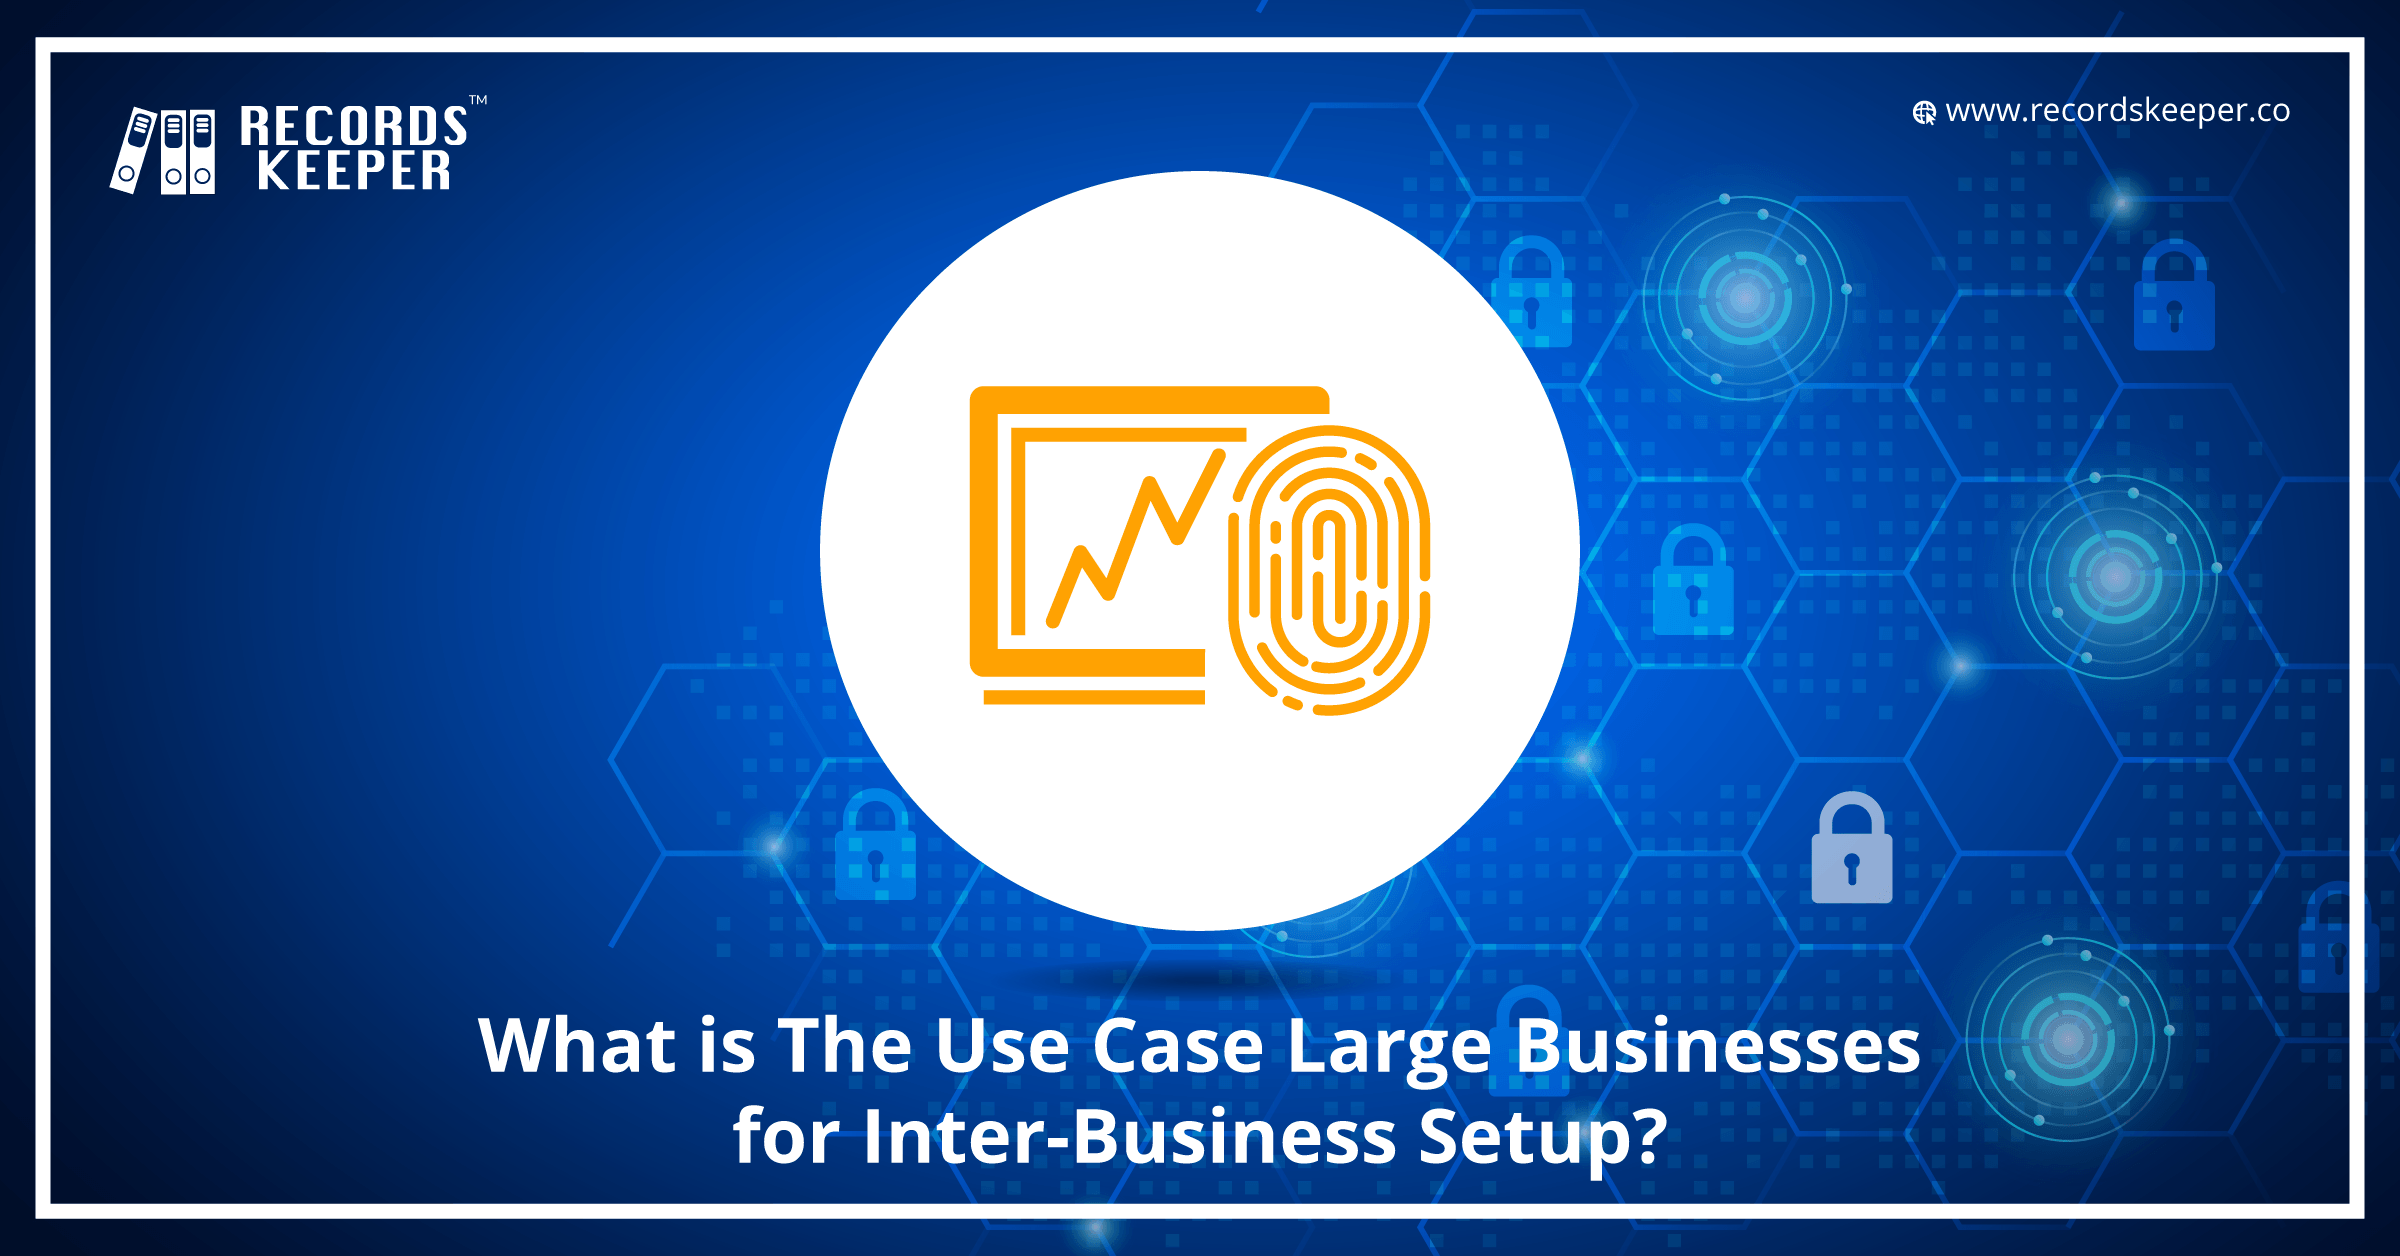 What is The Use Case Large Businesses for Inter-Business Setup?